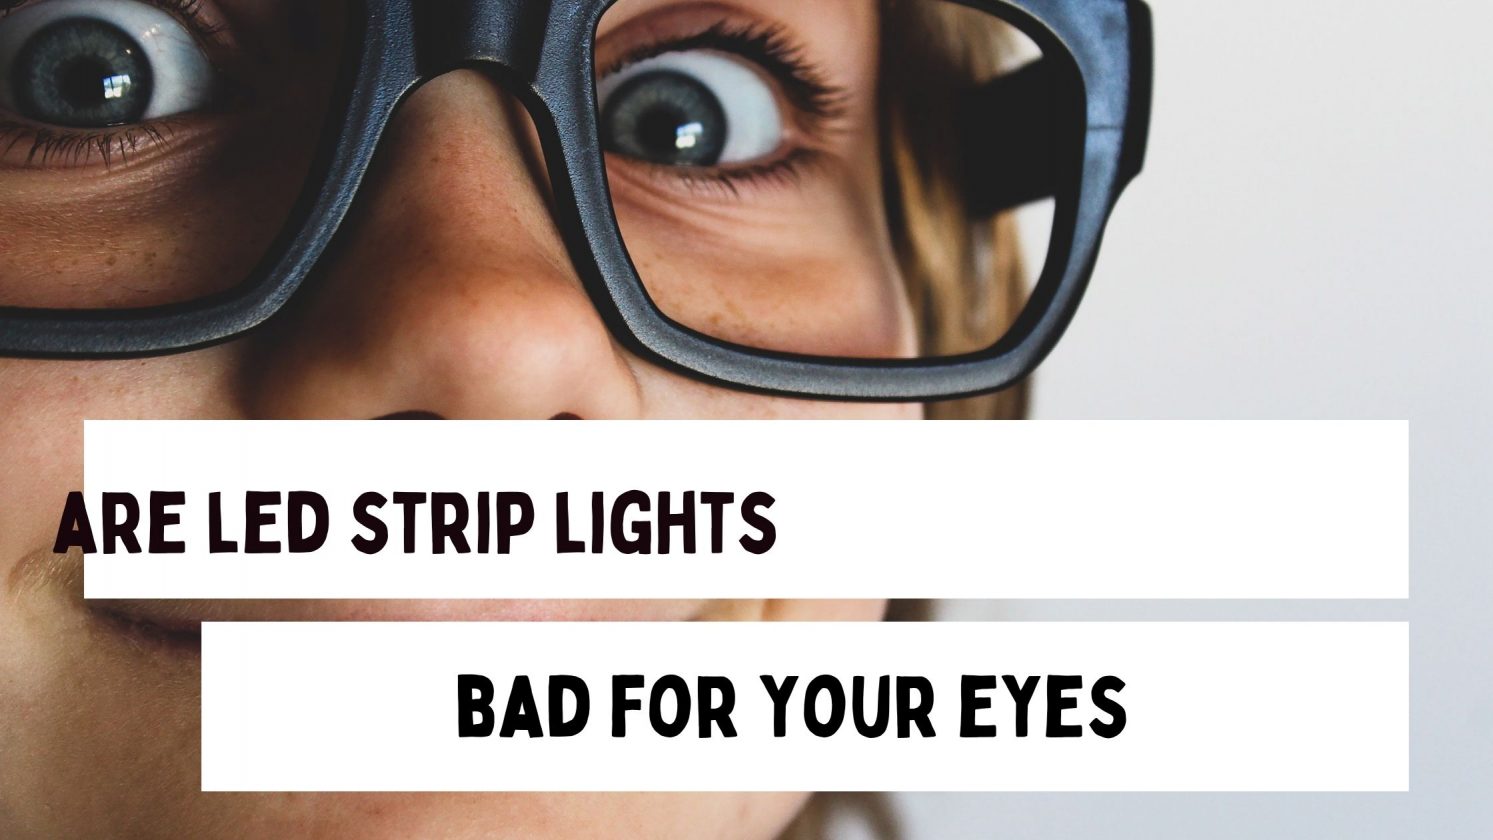 Are Led Strip Lights Bad For Your Eyes?